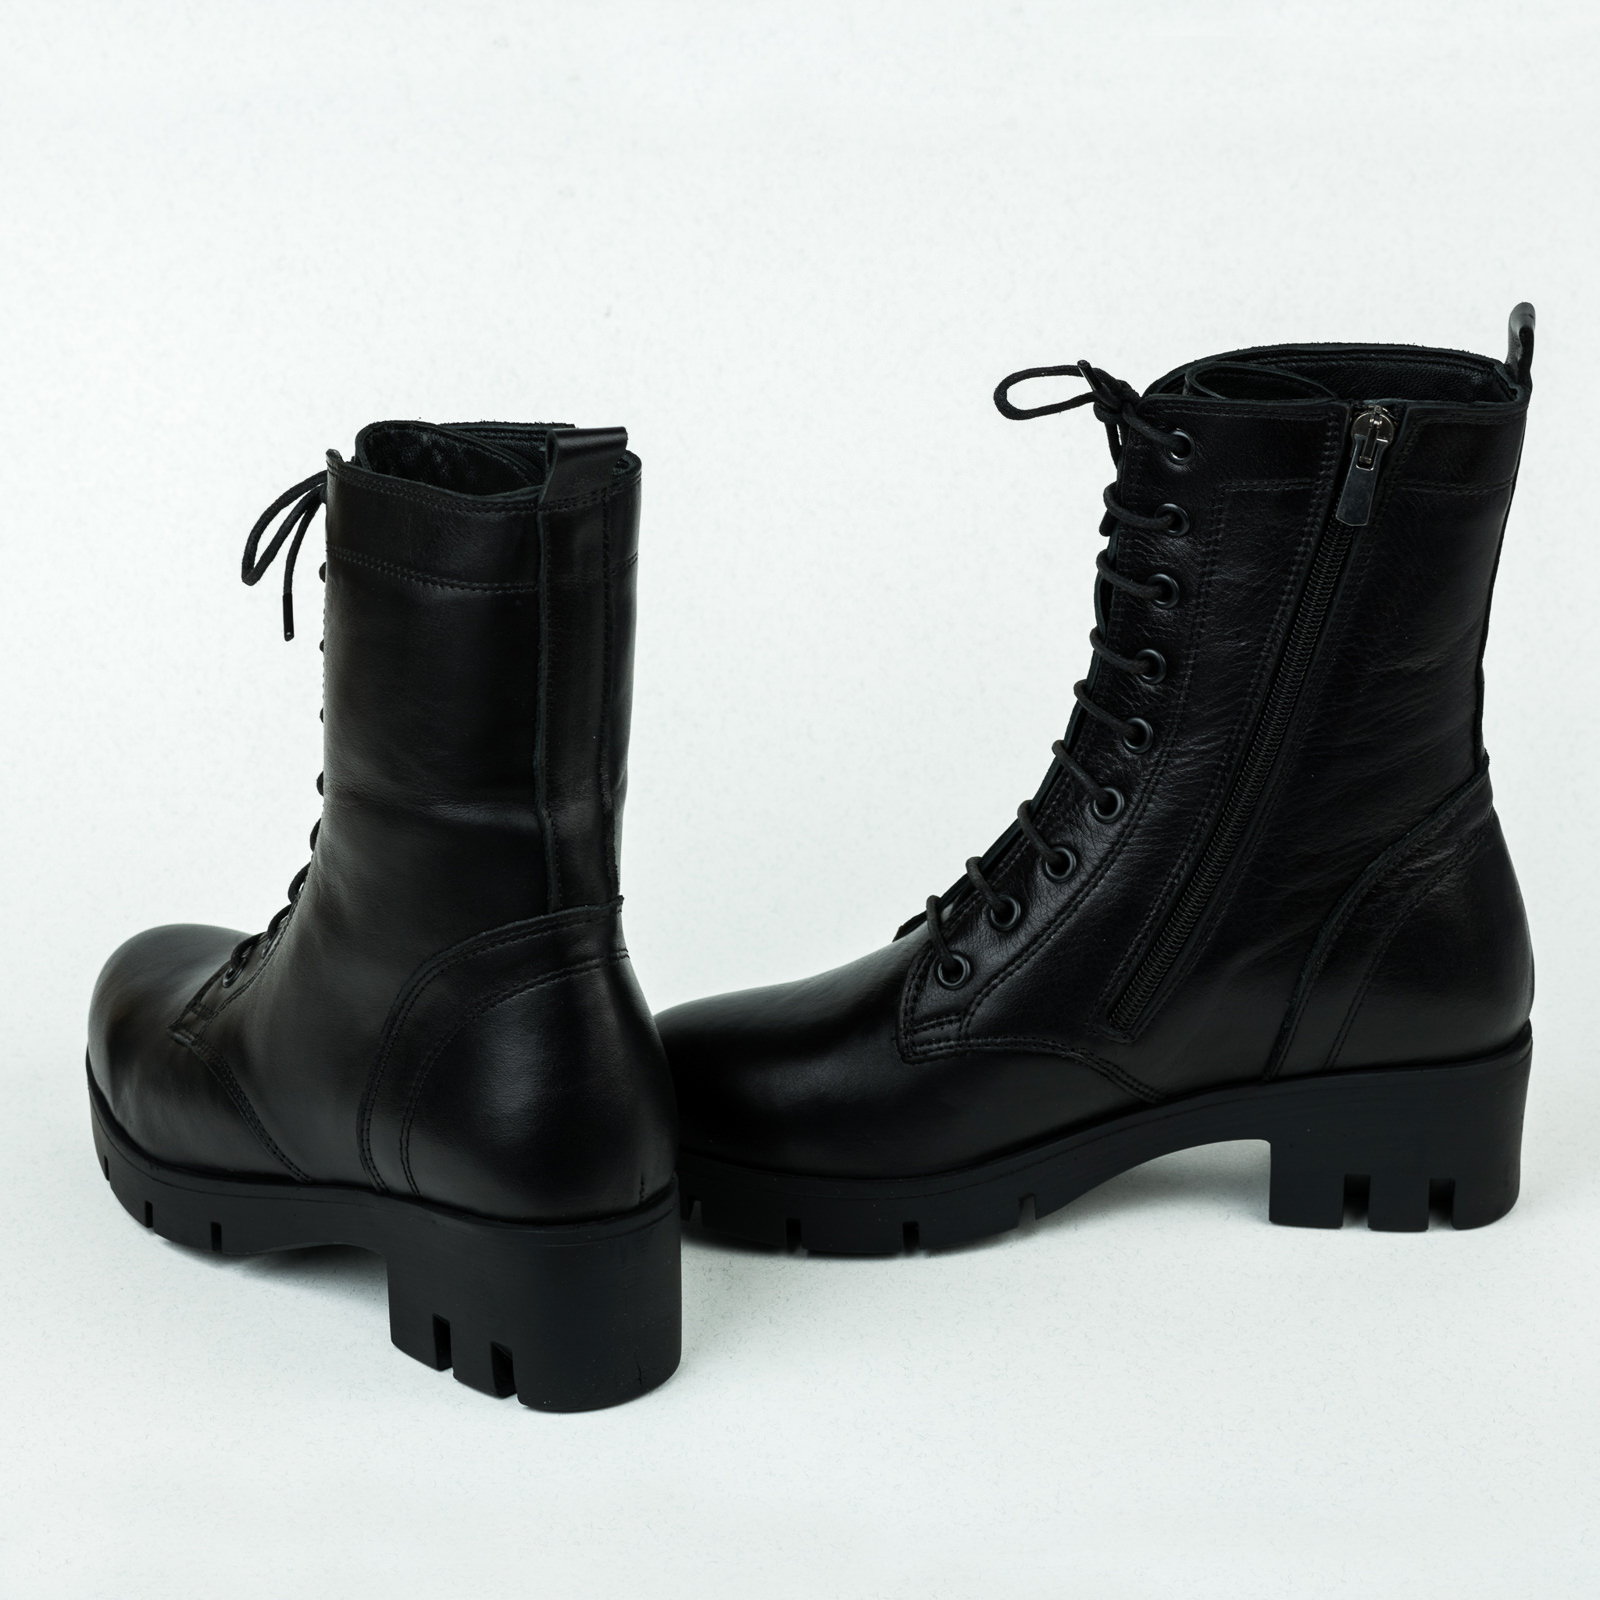 Leather ankle boots B054 - BLACK